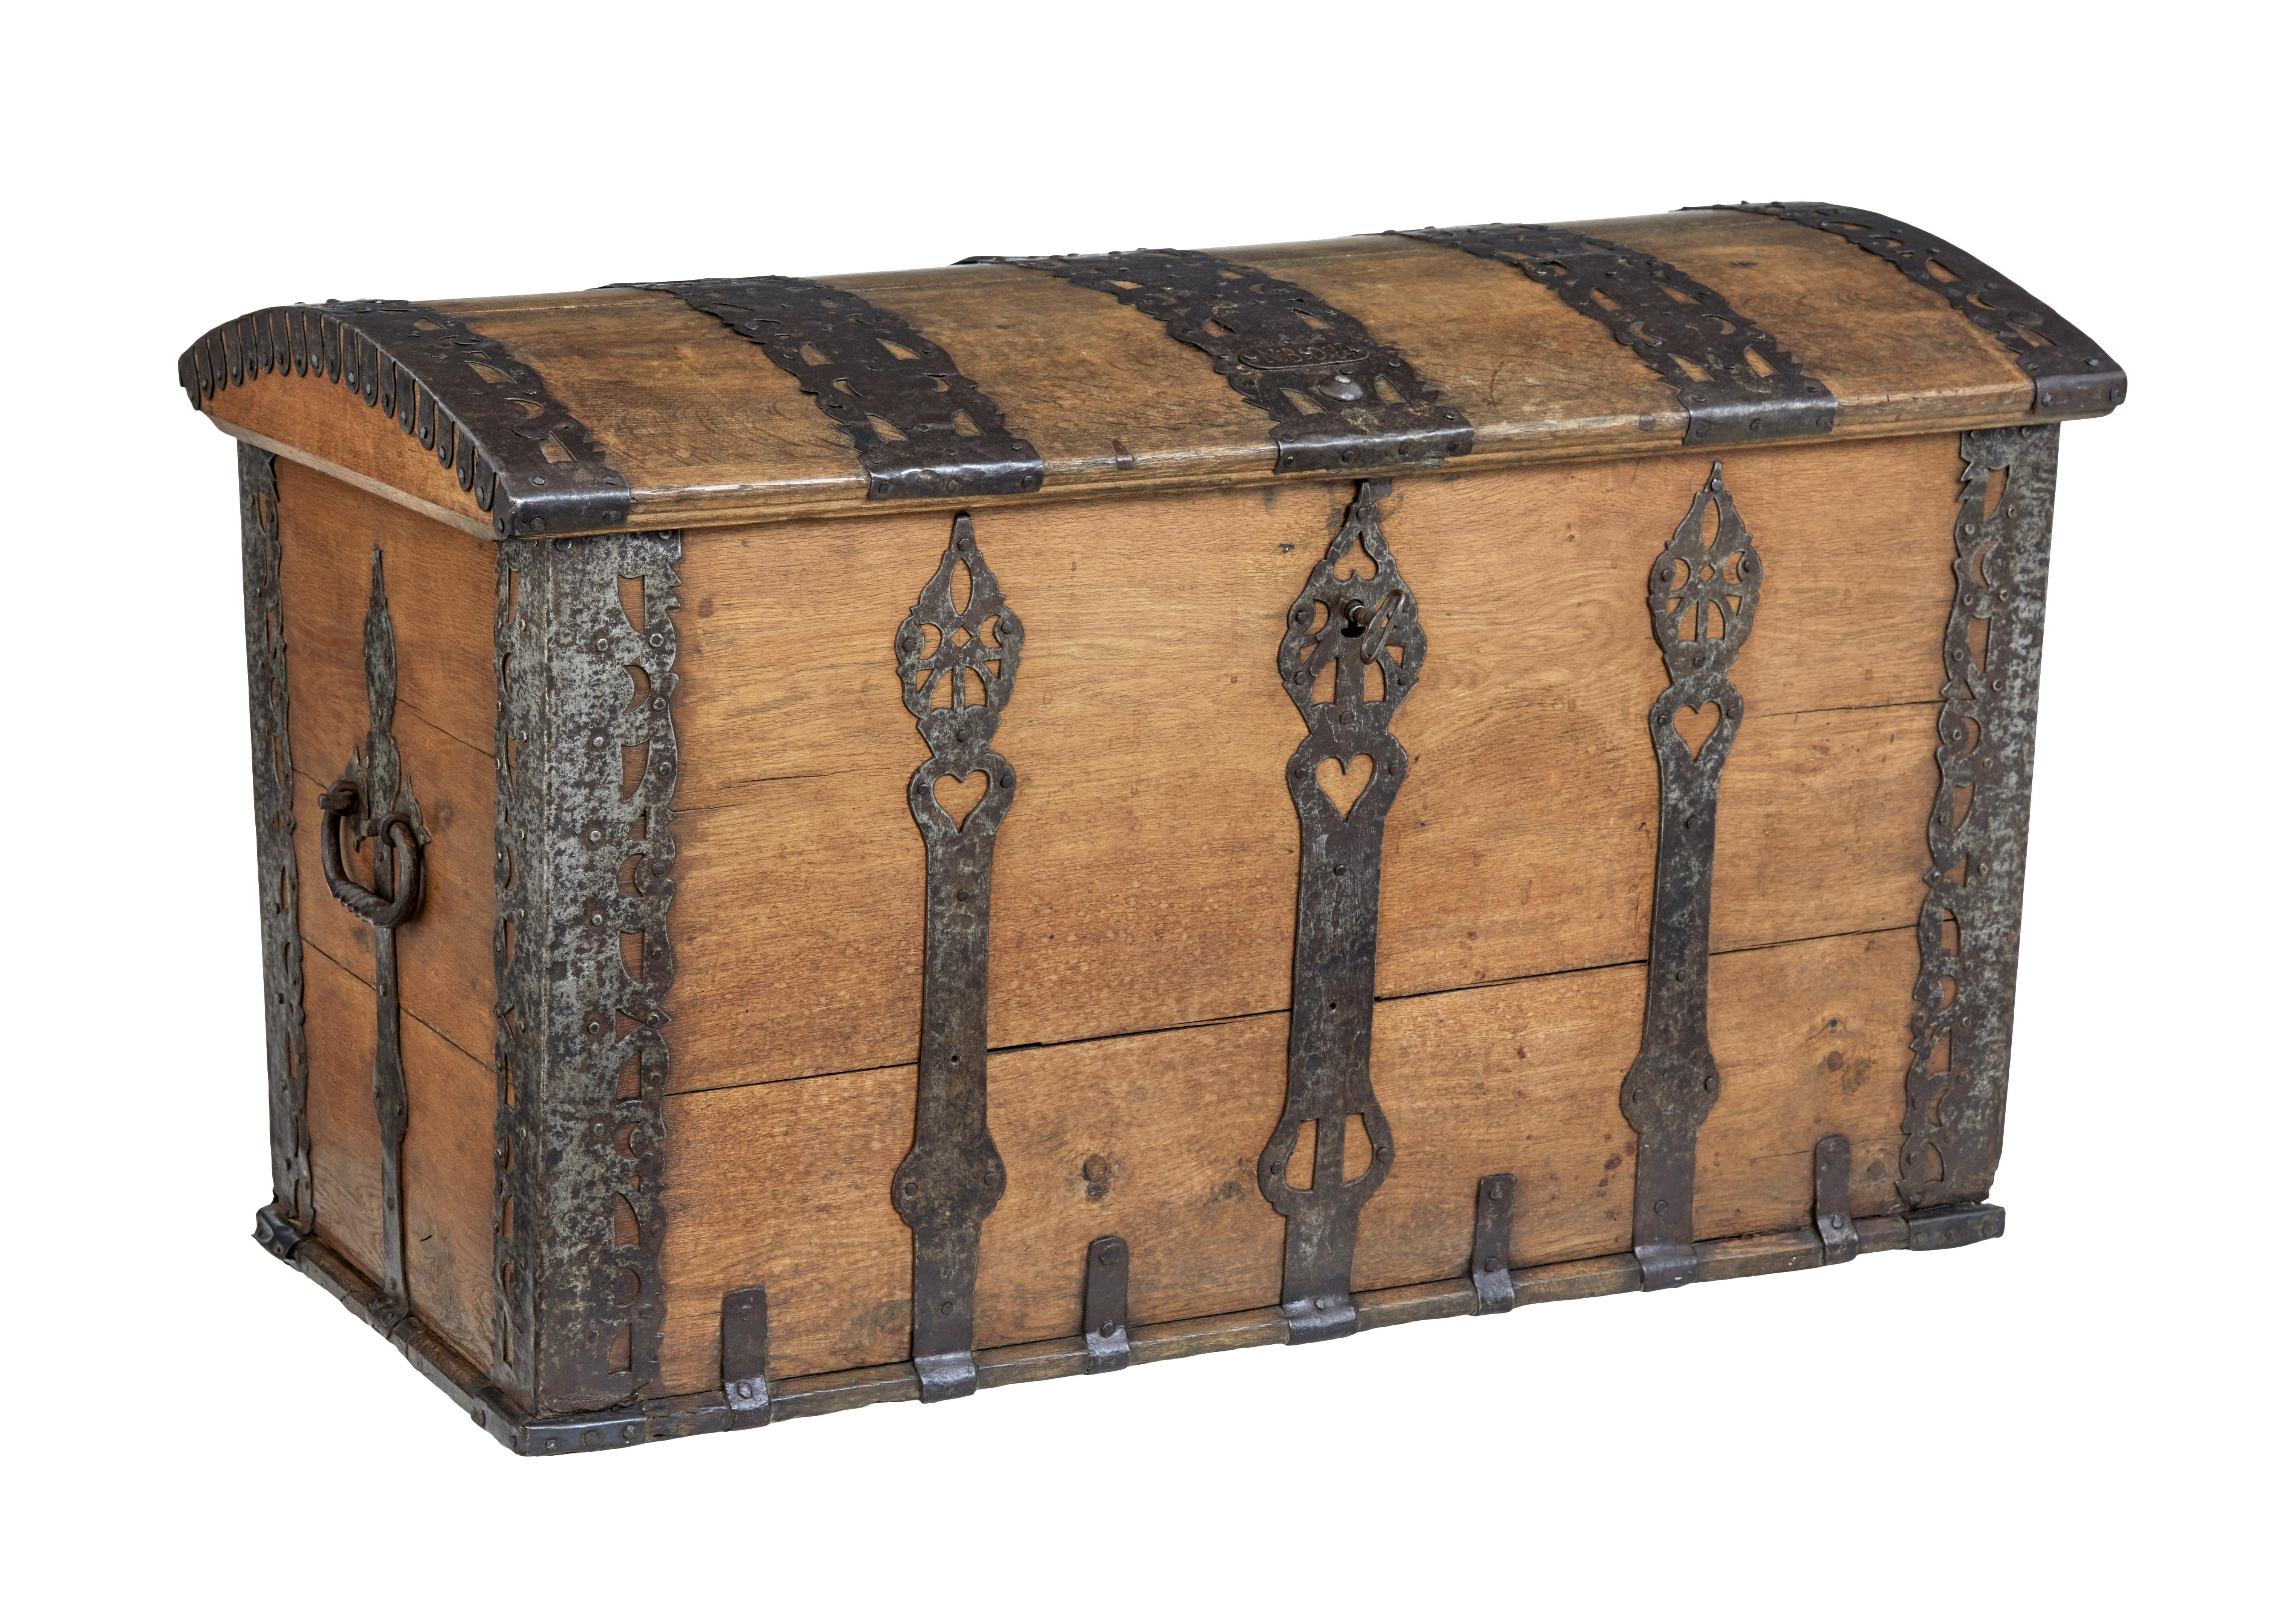 Mid 18th Century oak and iron dome top trunk circa 1769.

Fine quality dome top chest of large proportions. Solid oak, beautifully decorated with cast iron strap work. Lid opens to a plain interior and a fitted candle box.

Original working lock